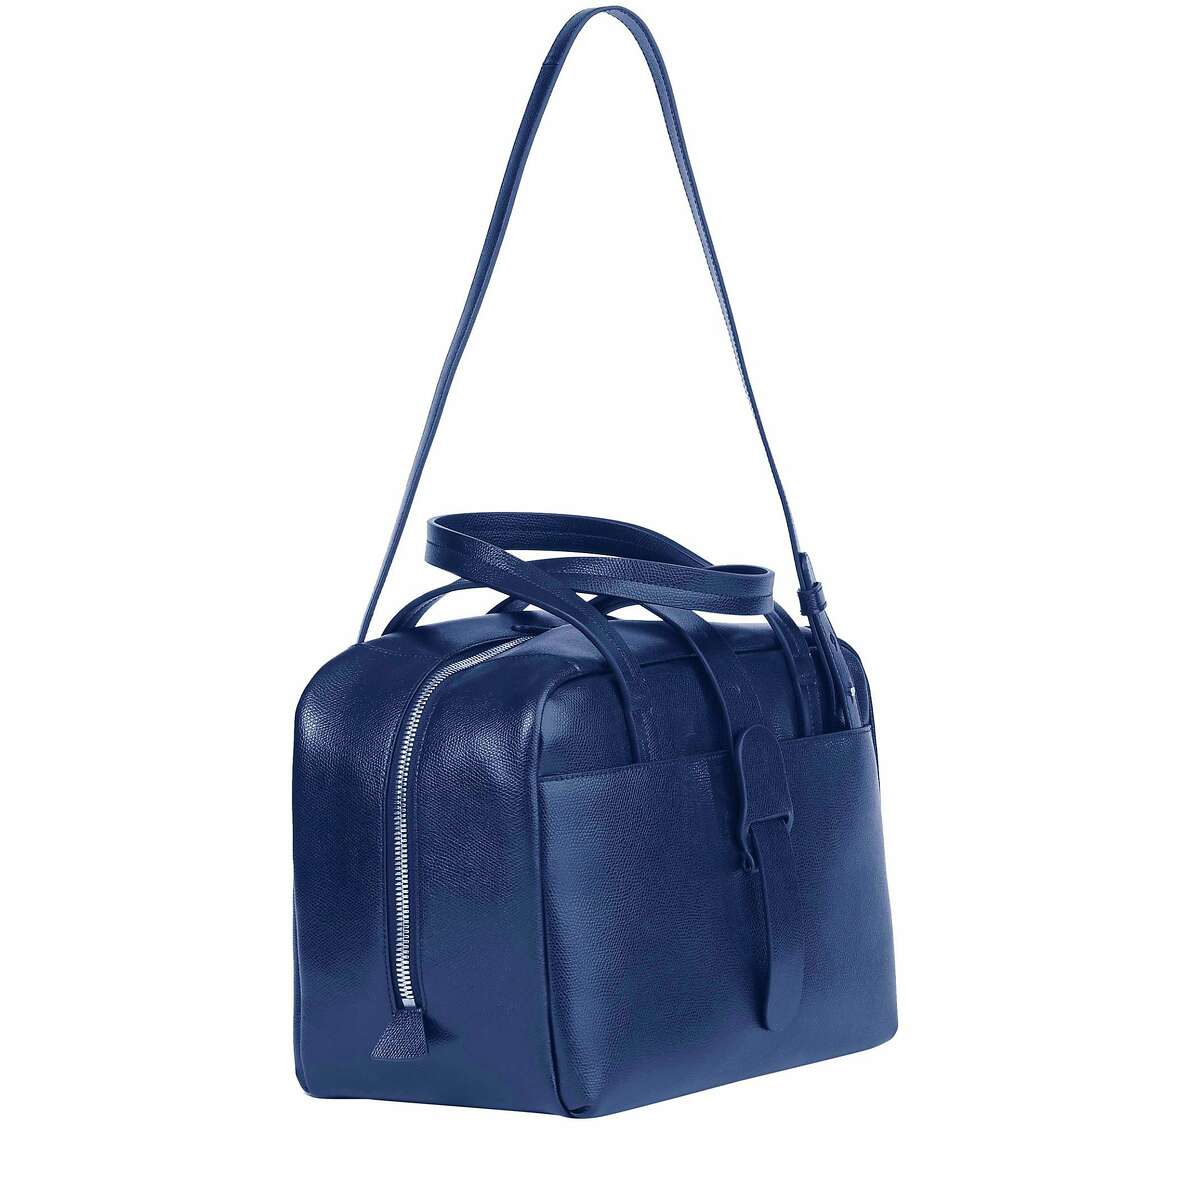 Designer Bags Are Up to 75% Off at Senreve's Sale